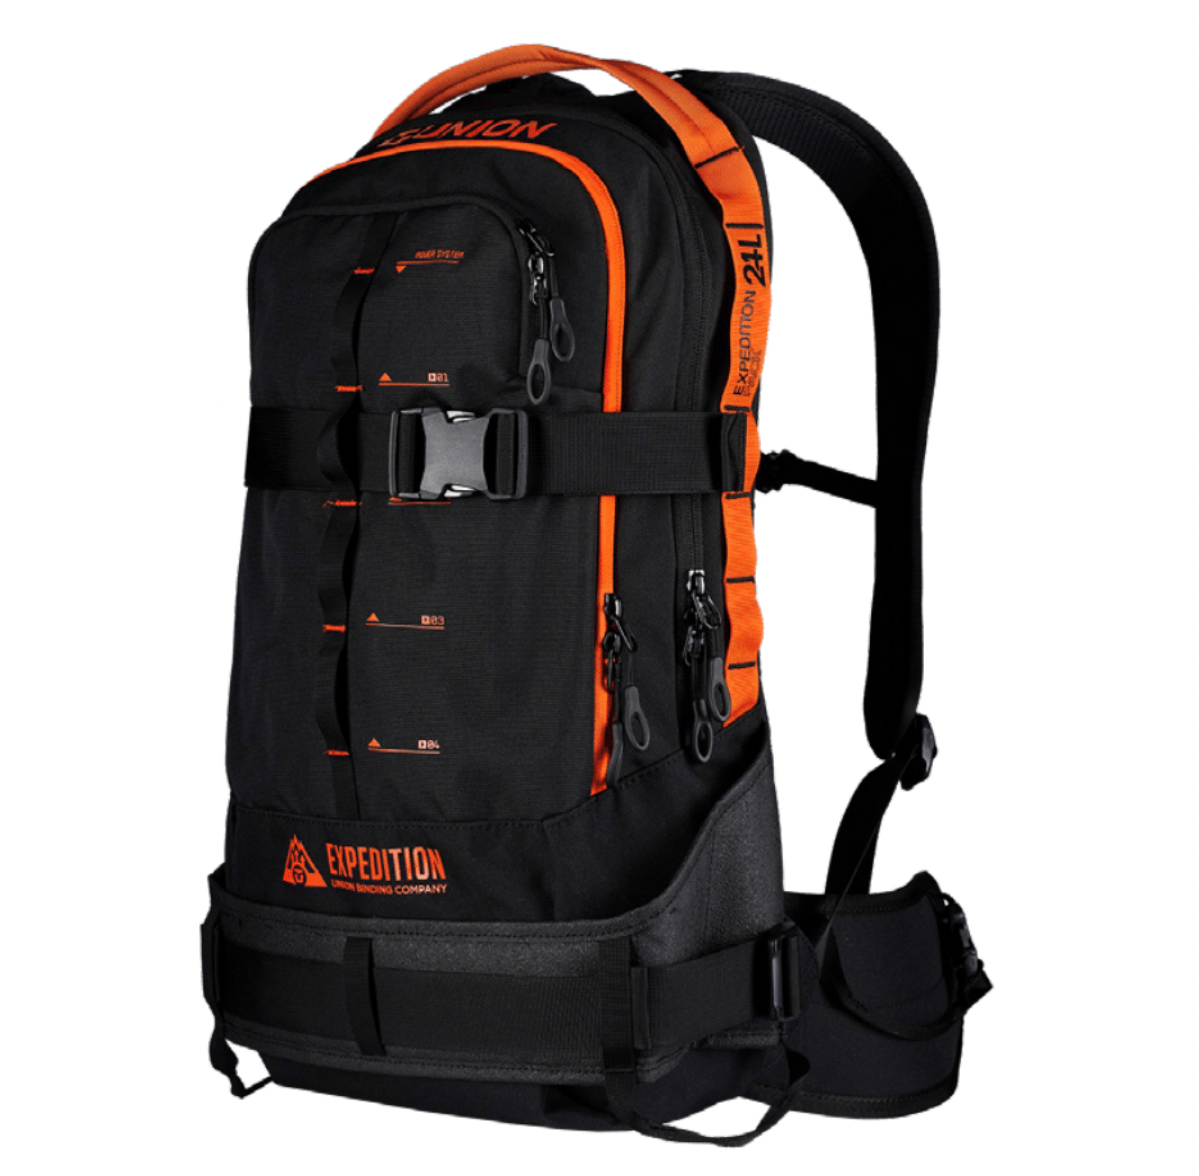 Faeröer Zonnebrand Humanistisch Union Rover Backcountry Backpack – Milo Snow and Skate